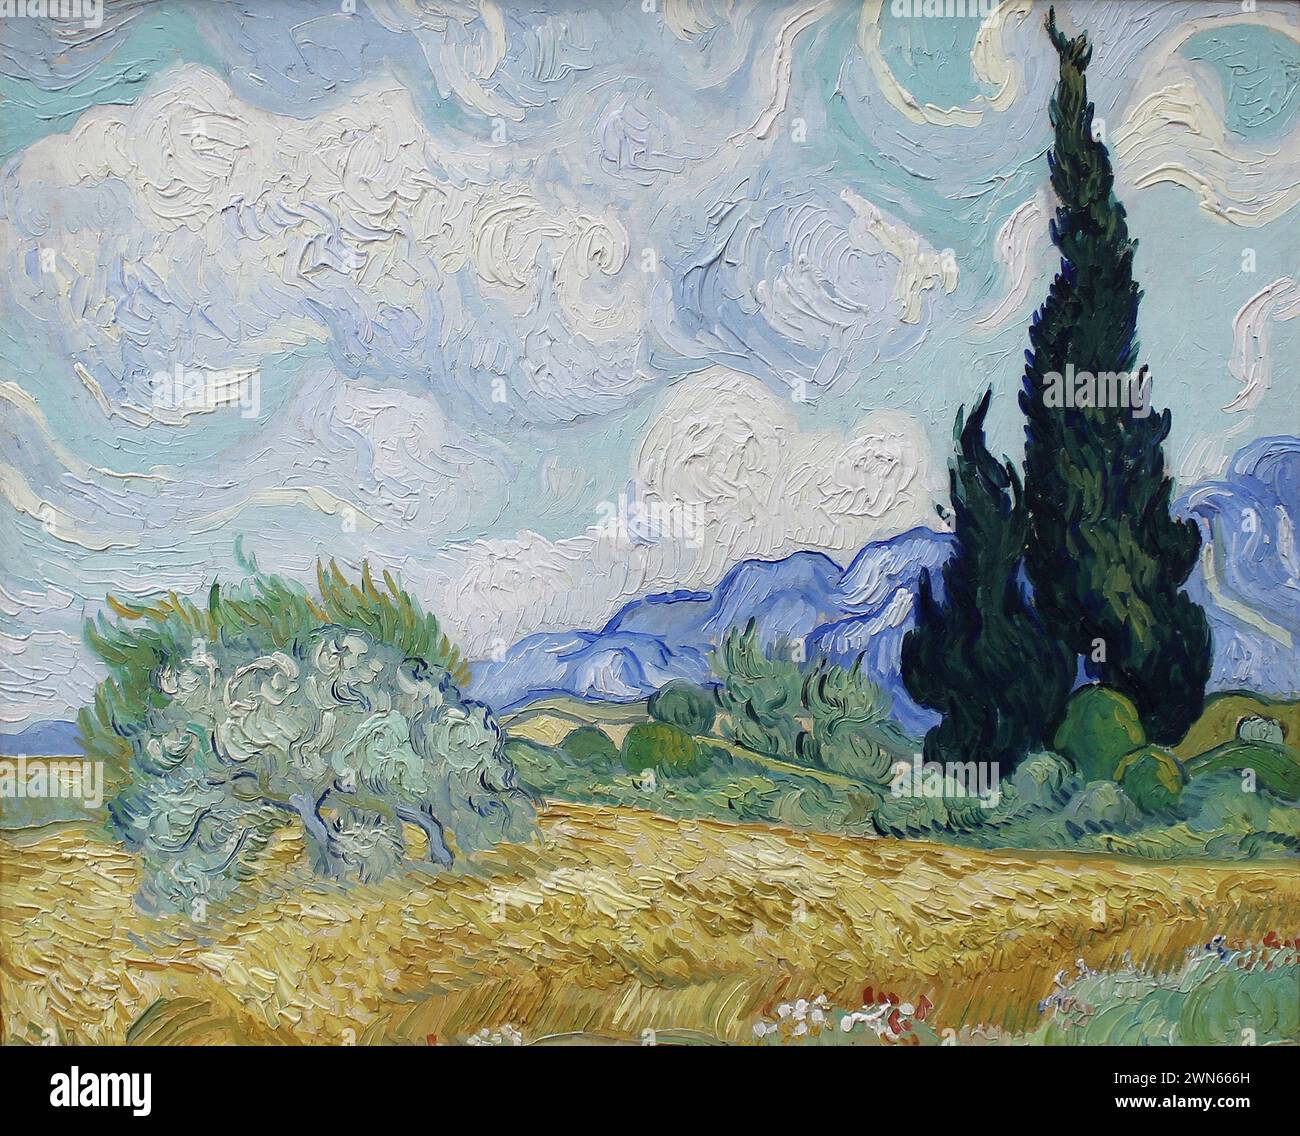 Van Gogh Vincent - Wheatfield with Cypresses (1889) Stock Photo